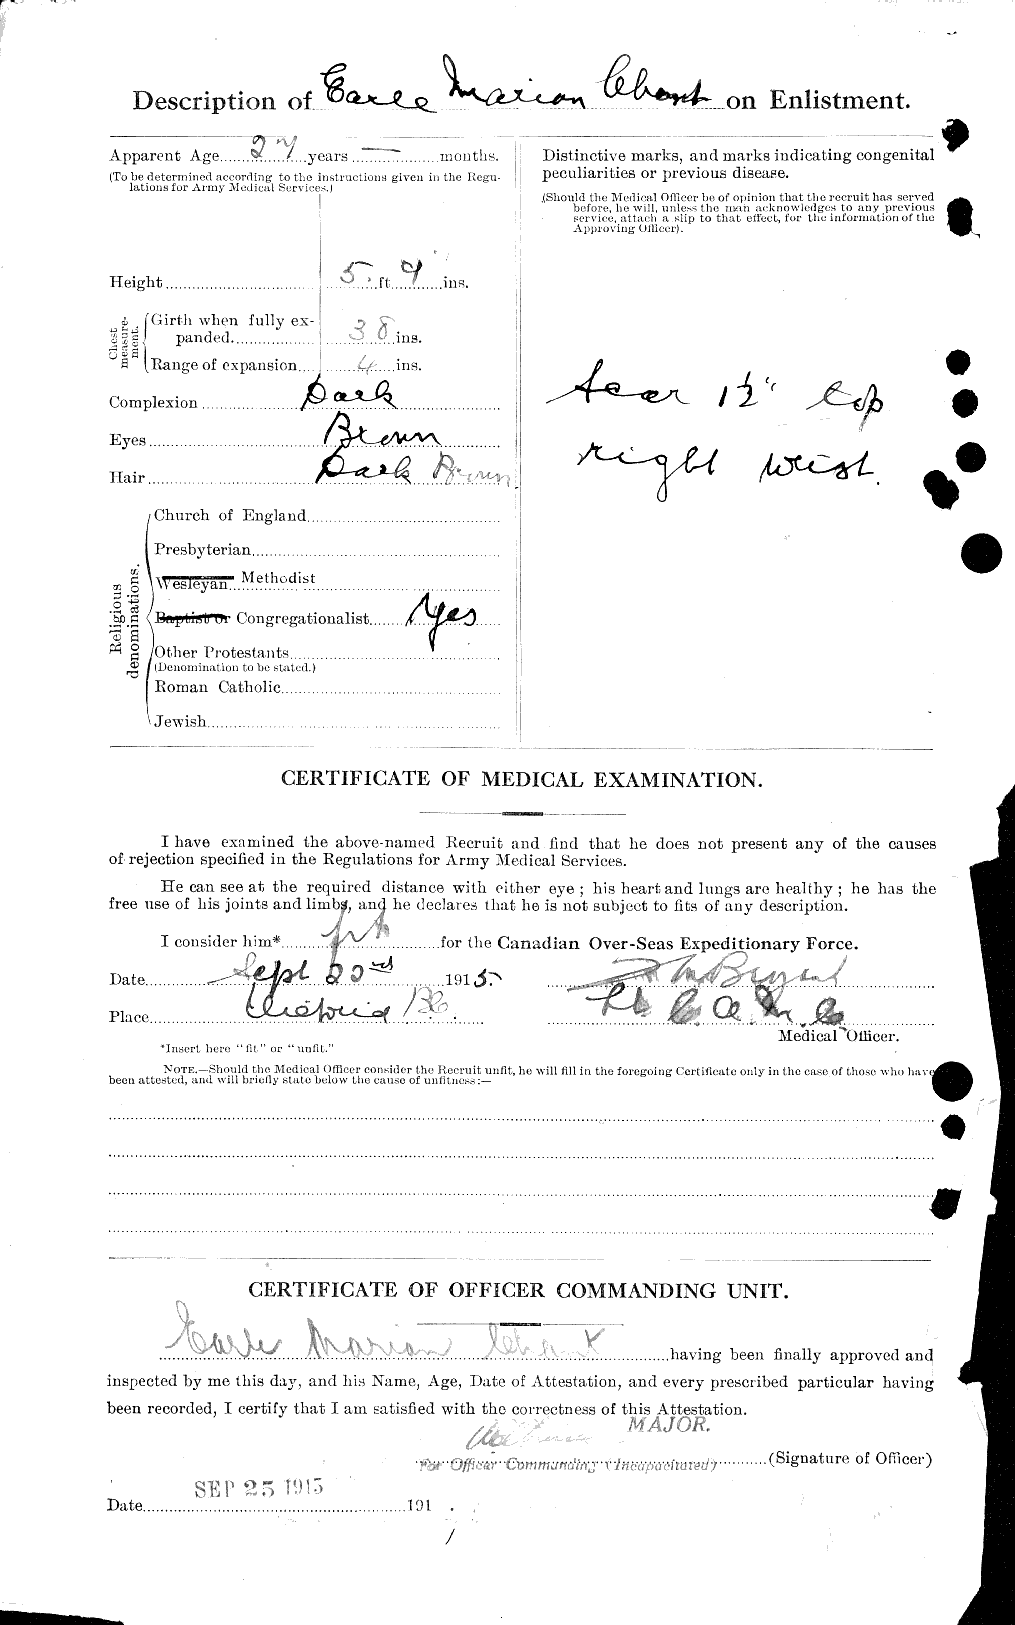 Personnel Records of the First World War - CEF 013855b